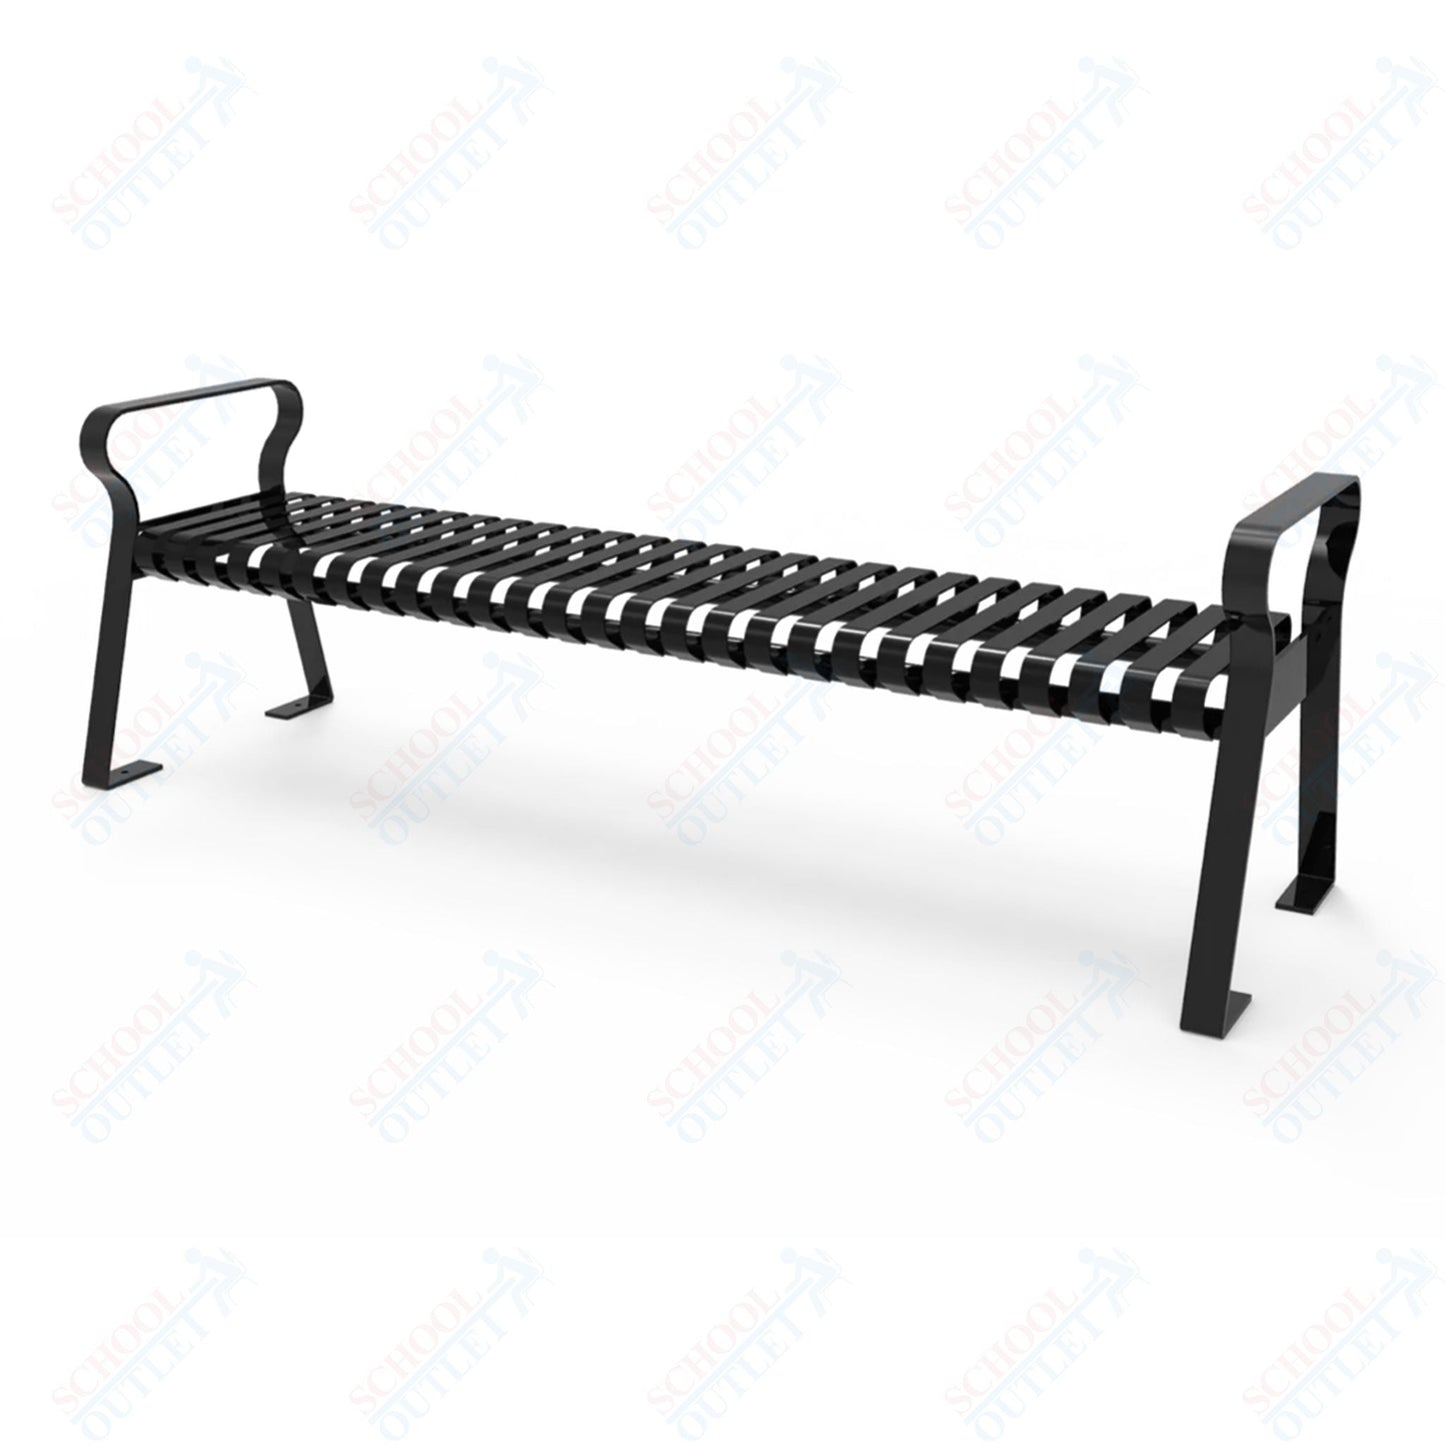 MyTcoat - Downtown Outdoor Bench Without back - Strap Metal - Portable or Surface Mount 6' L (MYT - BDT06 - K - 56) - SchoolOutlet